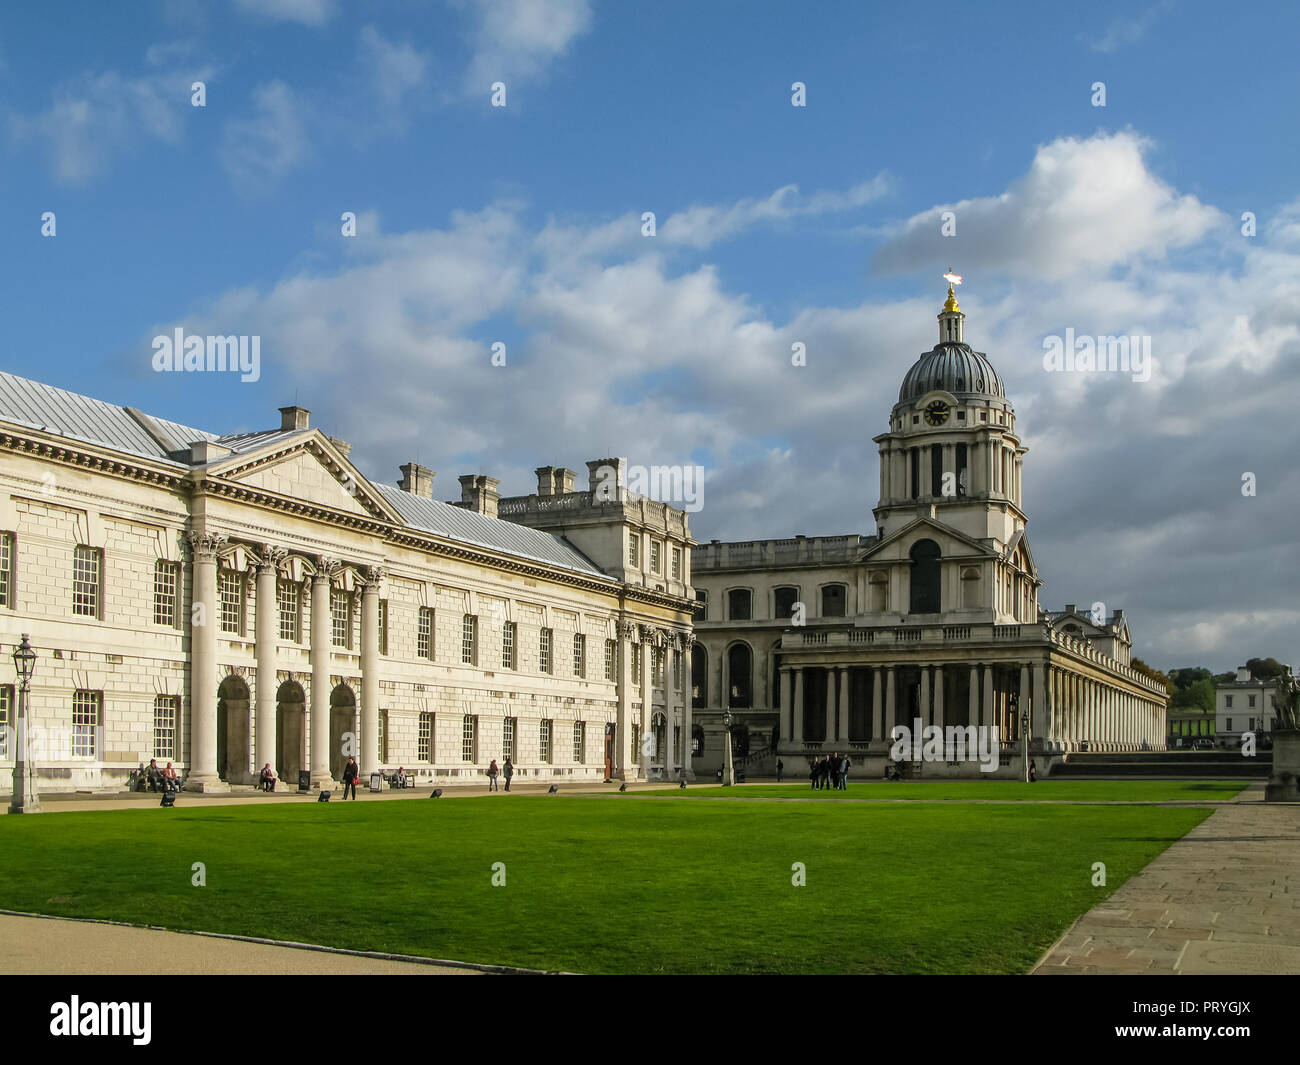 The Old Naval College, Greenwich, London, England. Designed in English Baroque style by Sir Christopher Wren, and a World Heritage Site, Stock Photo